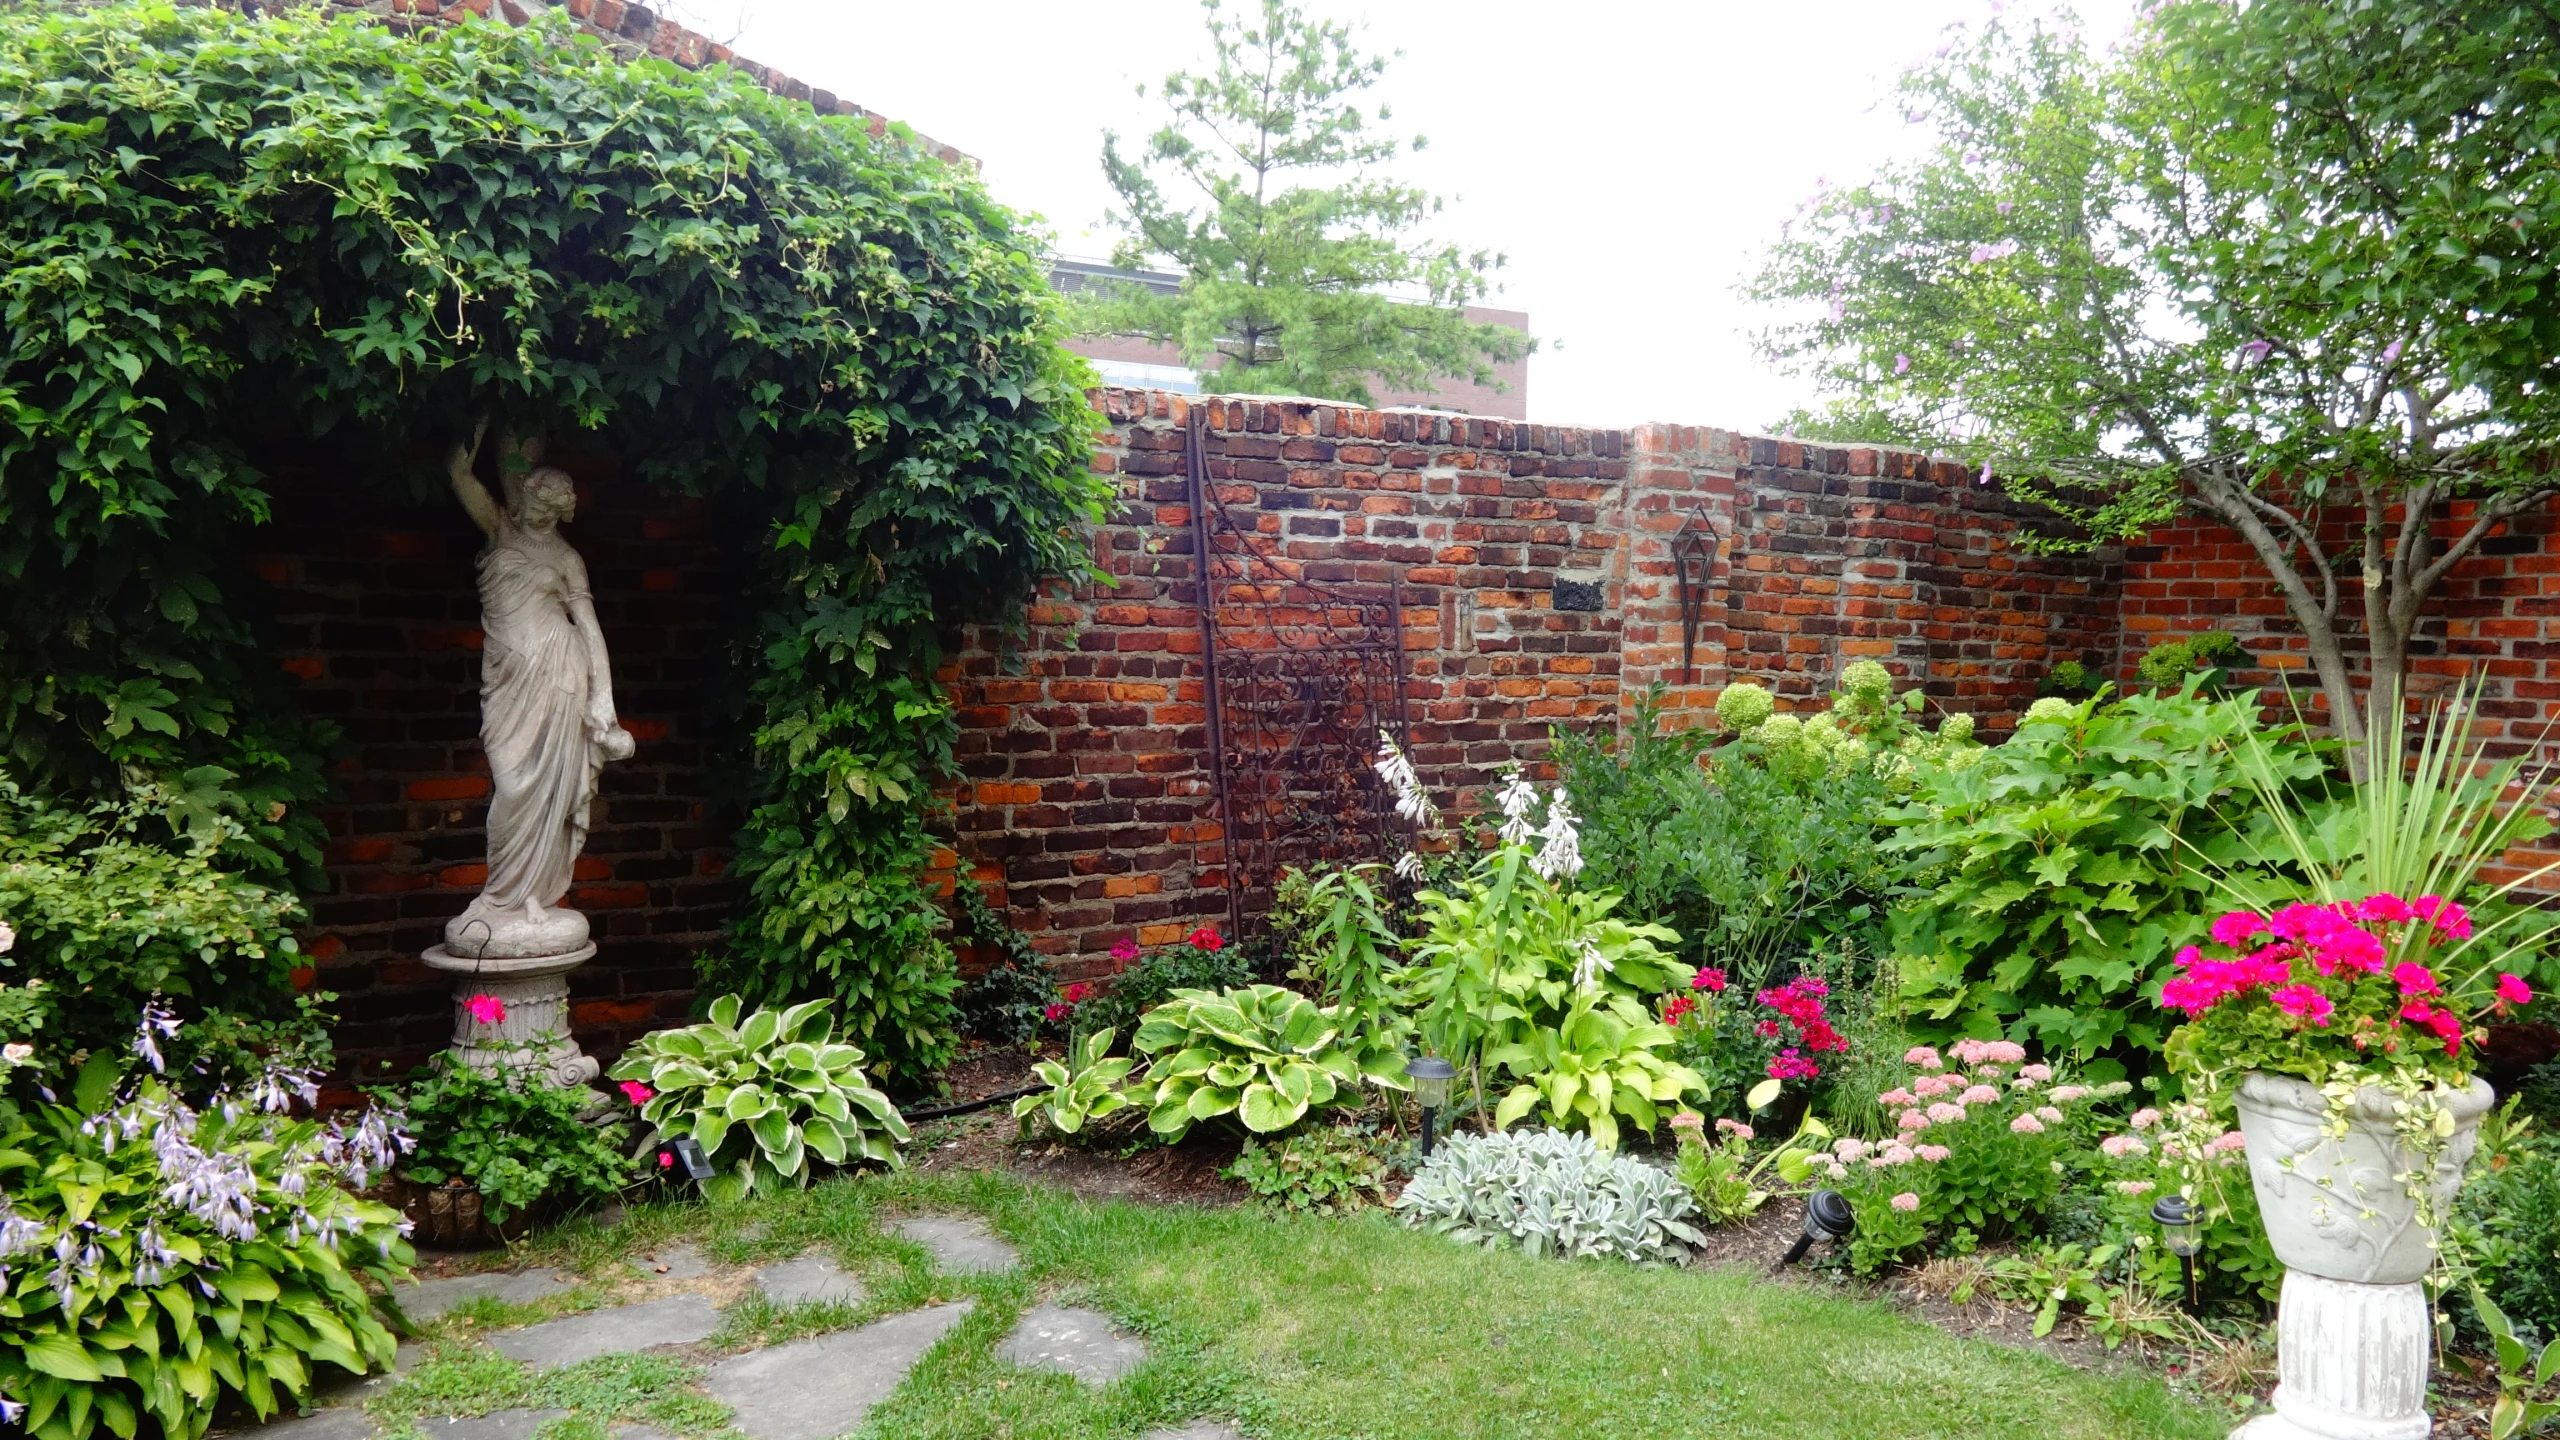 garden scene showing lawn with flowered area and statues